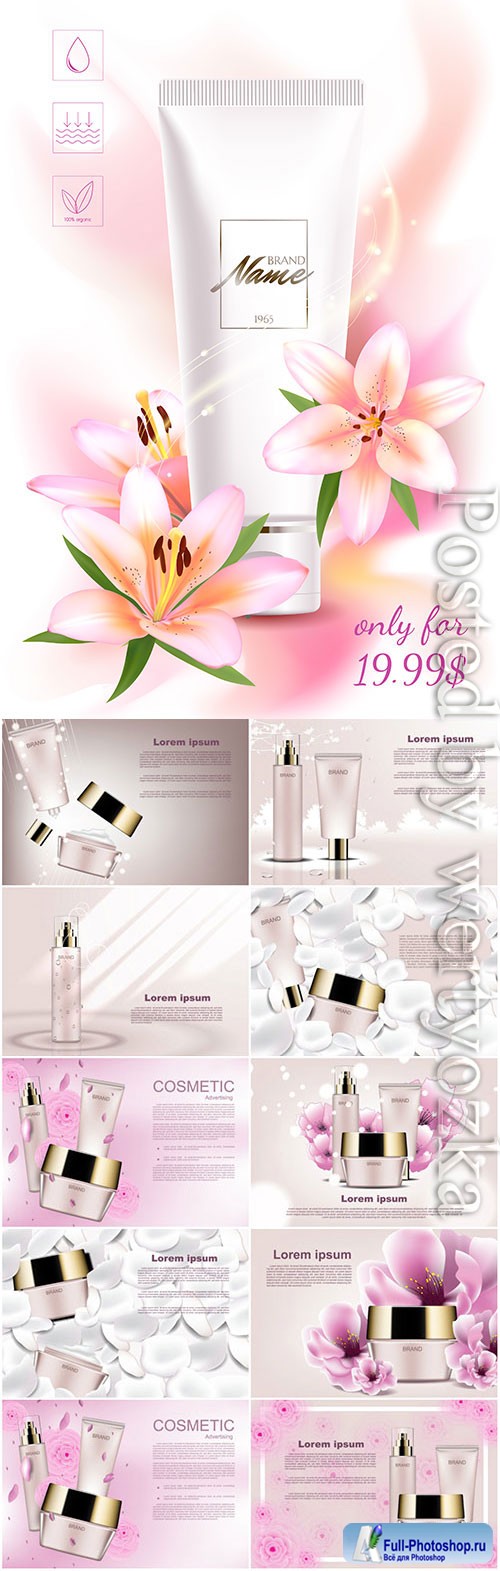 Cosmetic products on background with flowers in vector